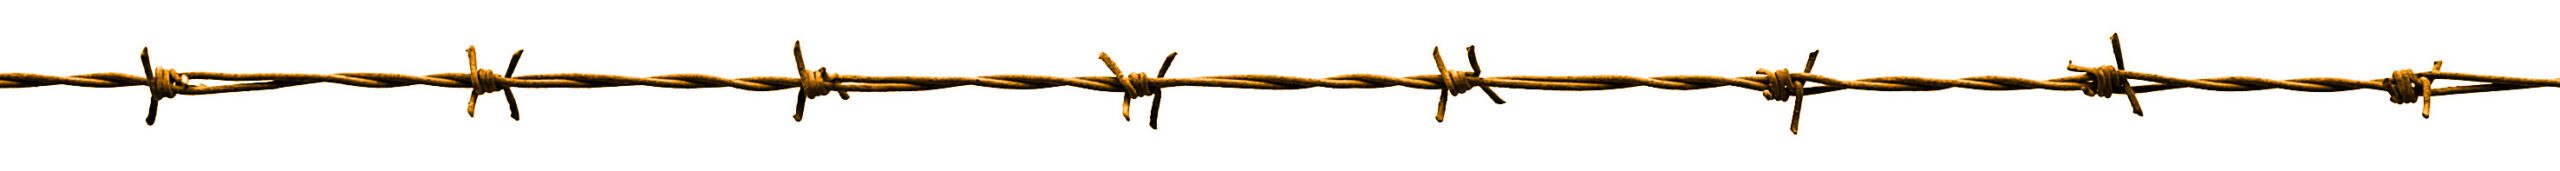 illustration of a single barbed wire